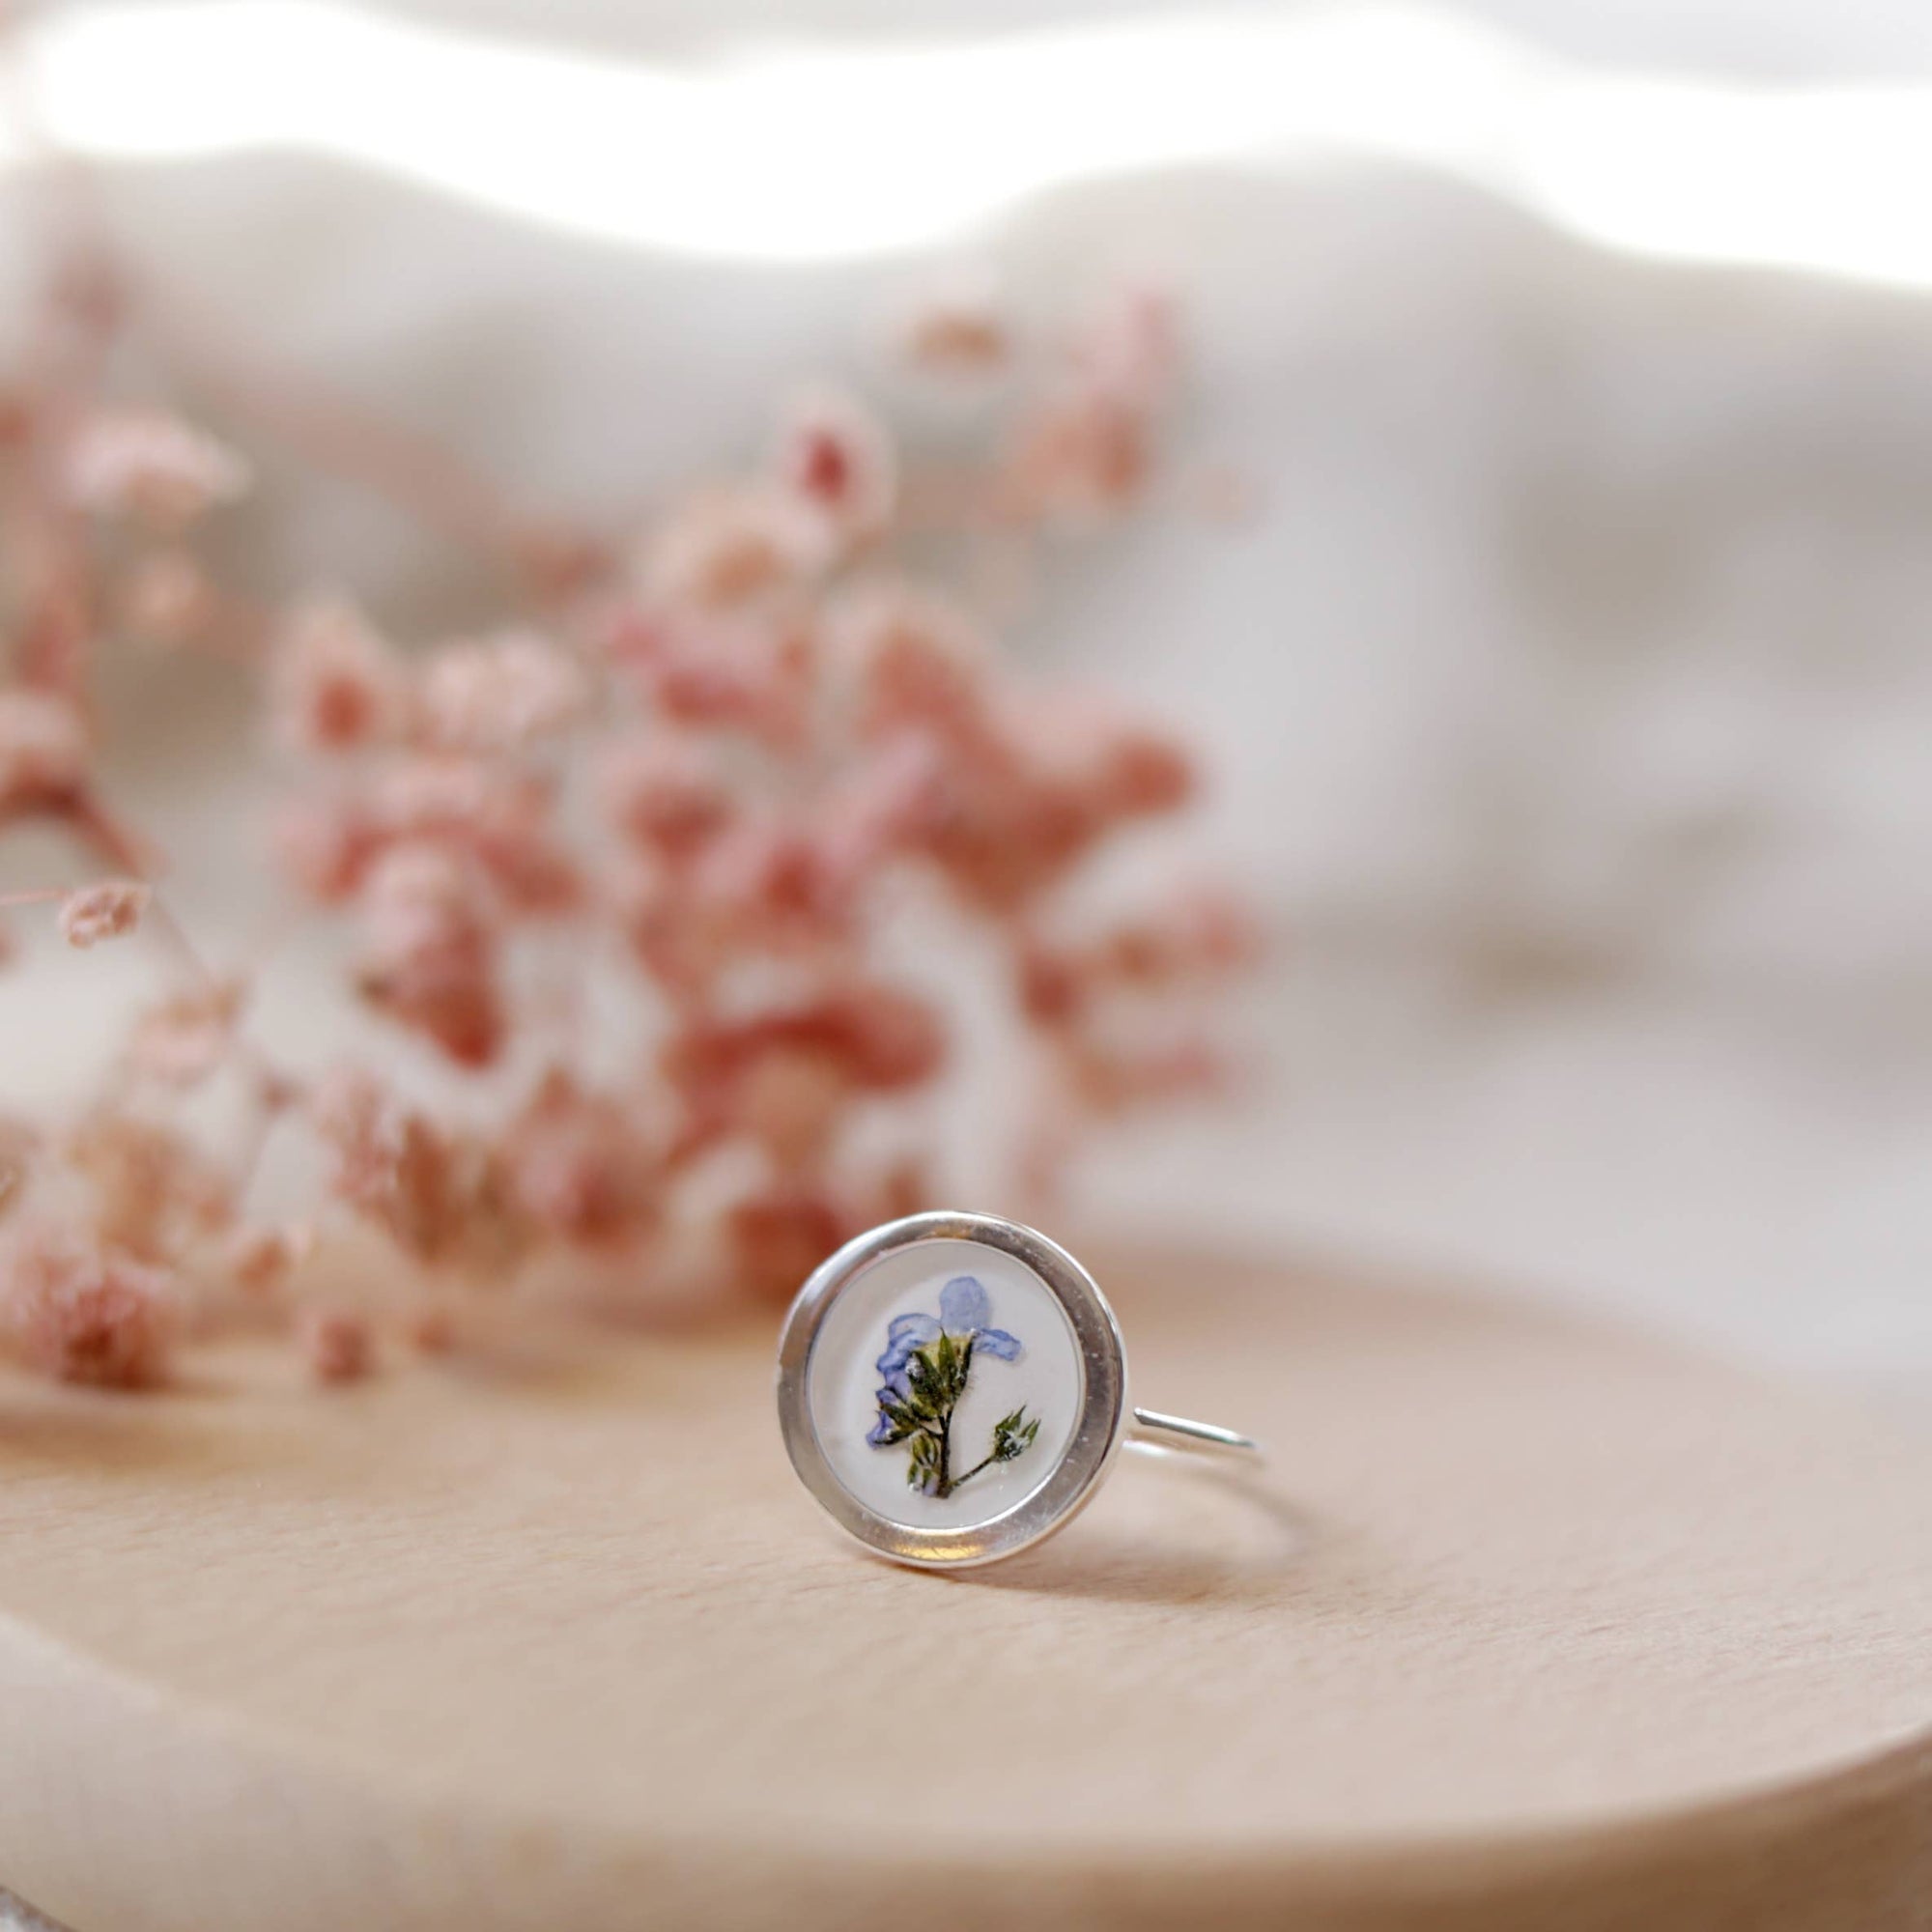 Nordic Flowers - Forget Me Not Sterling Silver Adjustable Ring